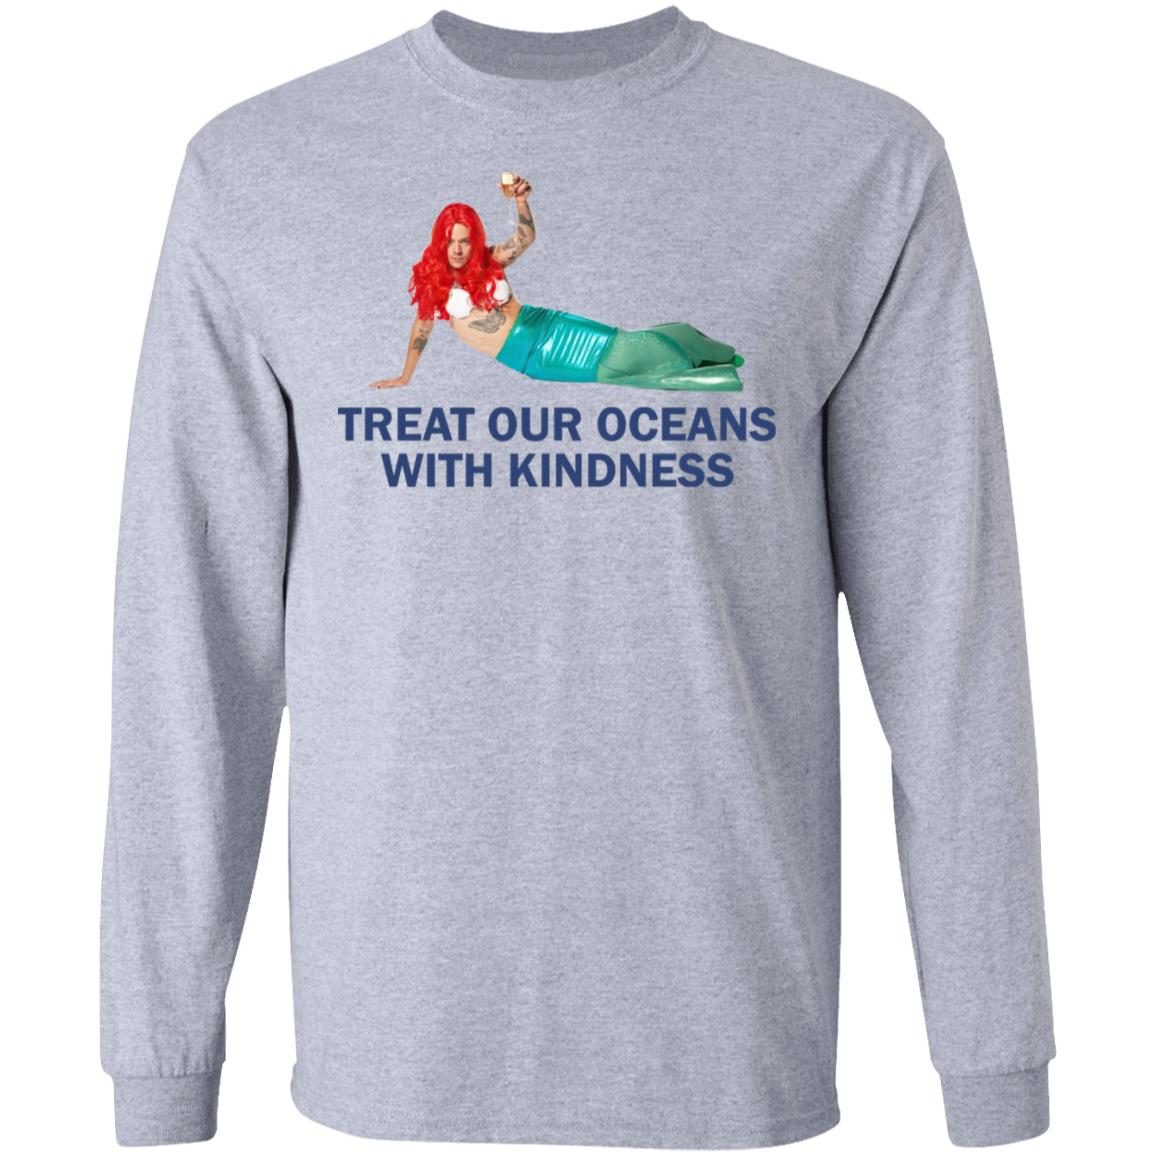 Treat Our Oceans With Kindness Shirt